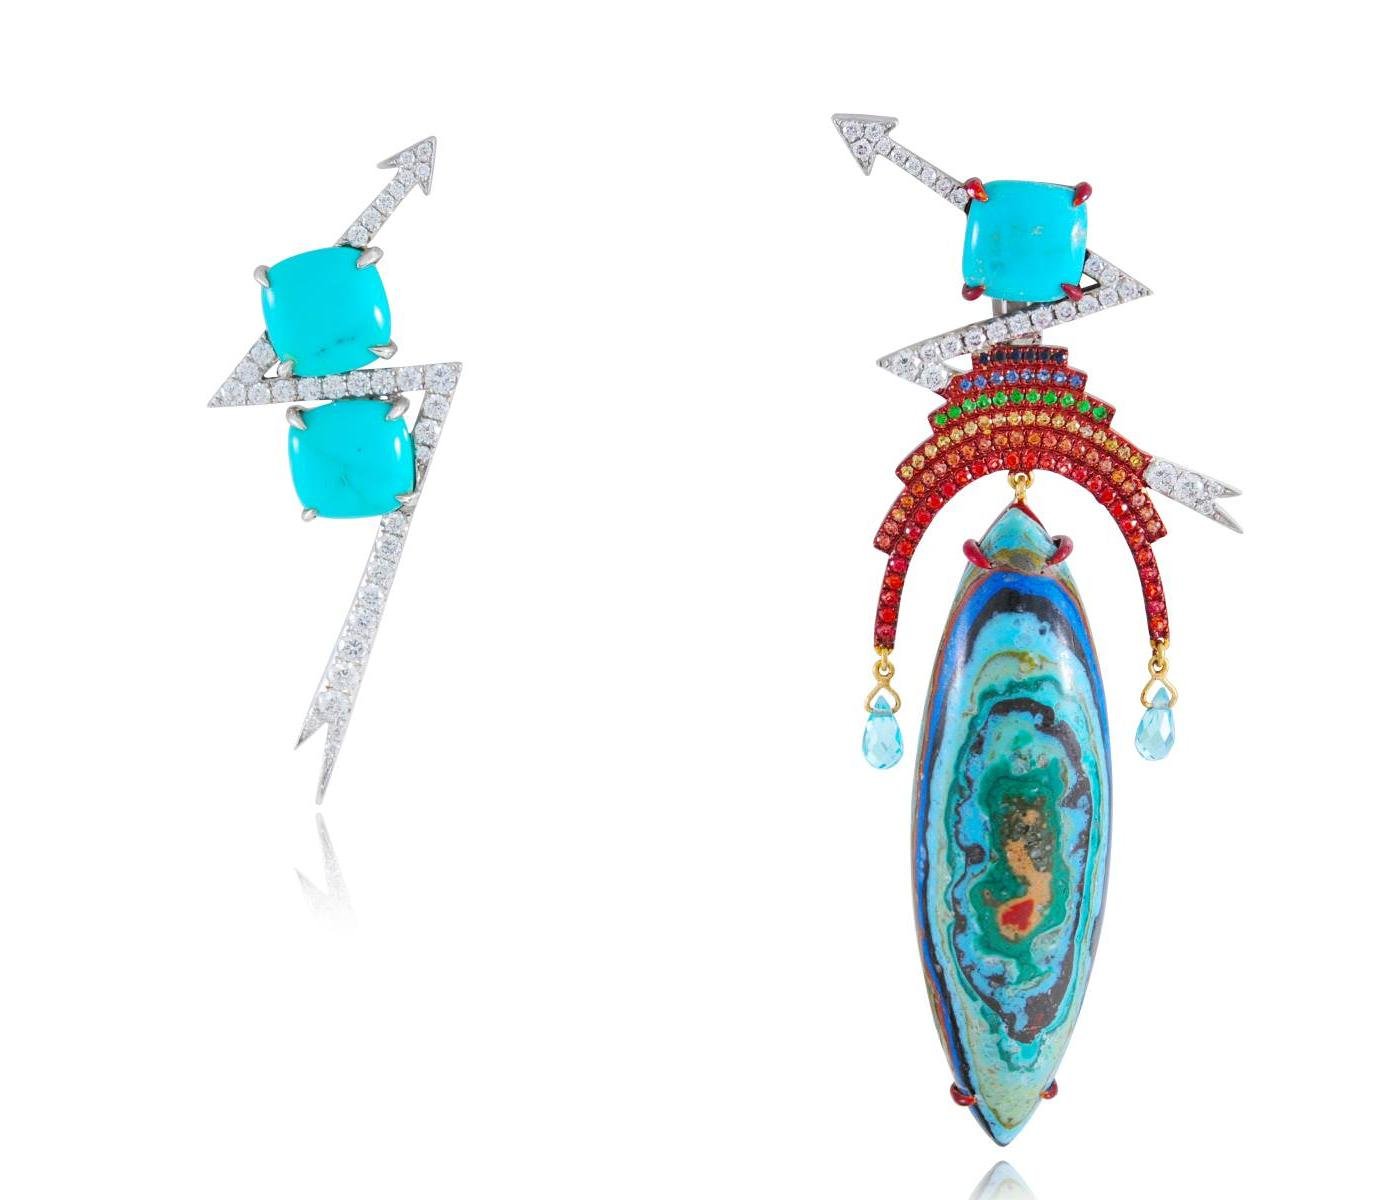 Earrings by Lydia Courteille